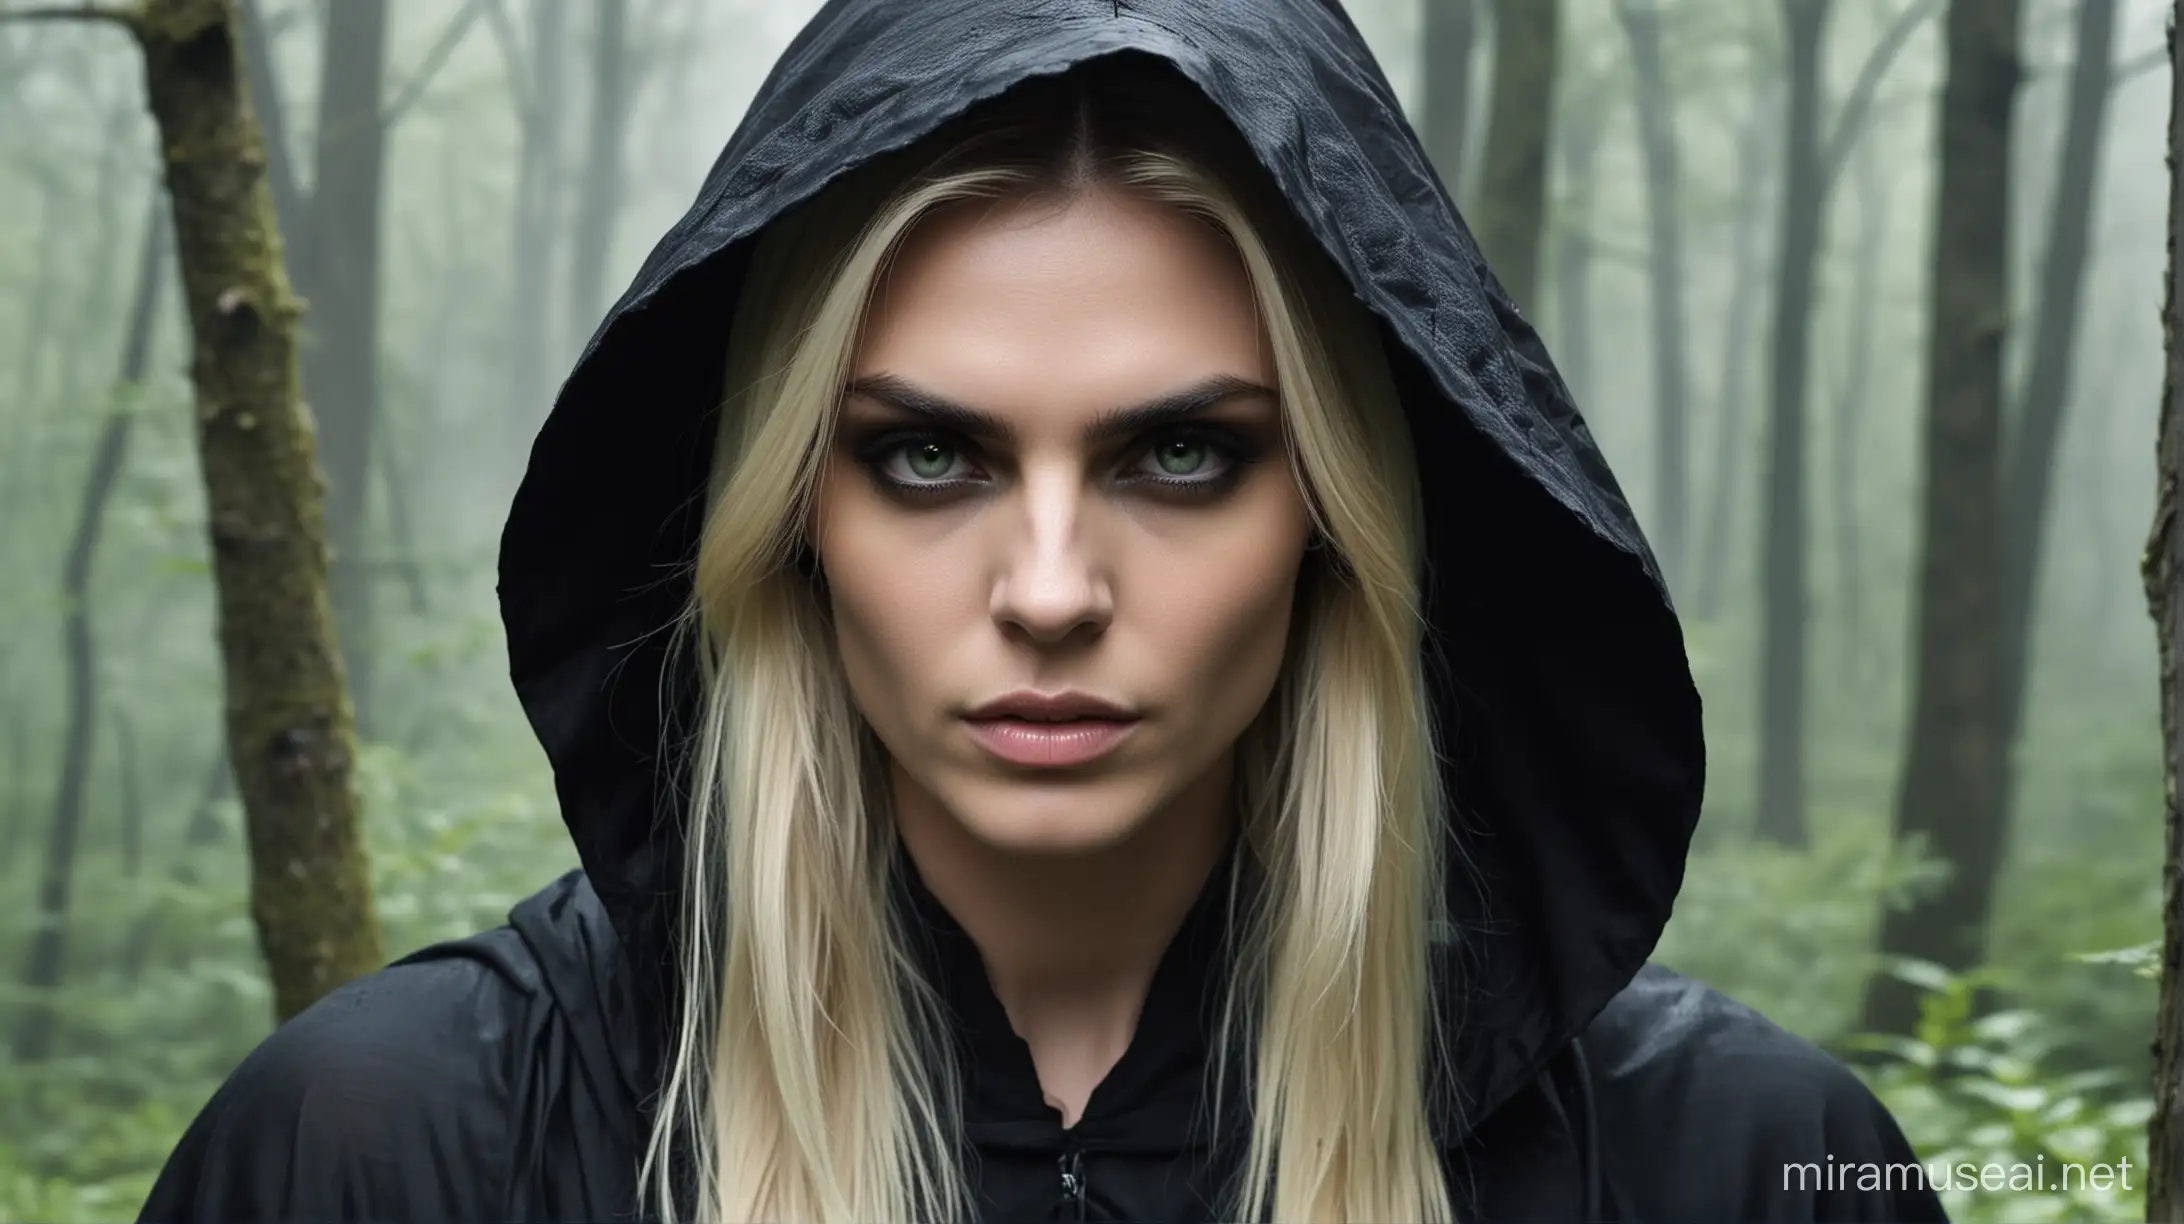 Stunningly beautiful young man Andrej pejic with black kohl liner around misty green eyes, wearing a black cloak and about to cast a spell in a forest